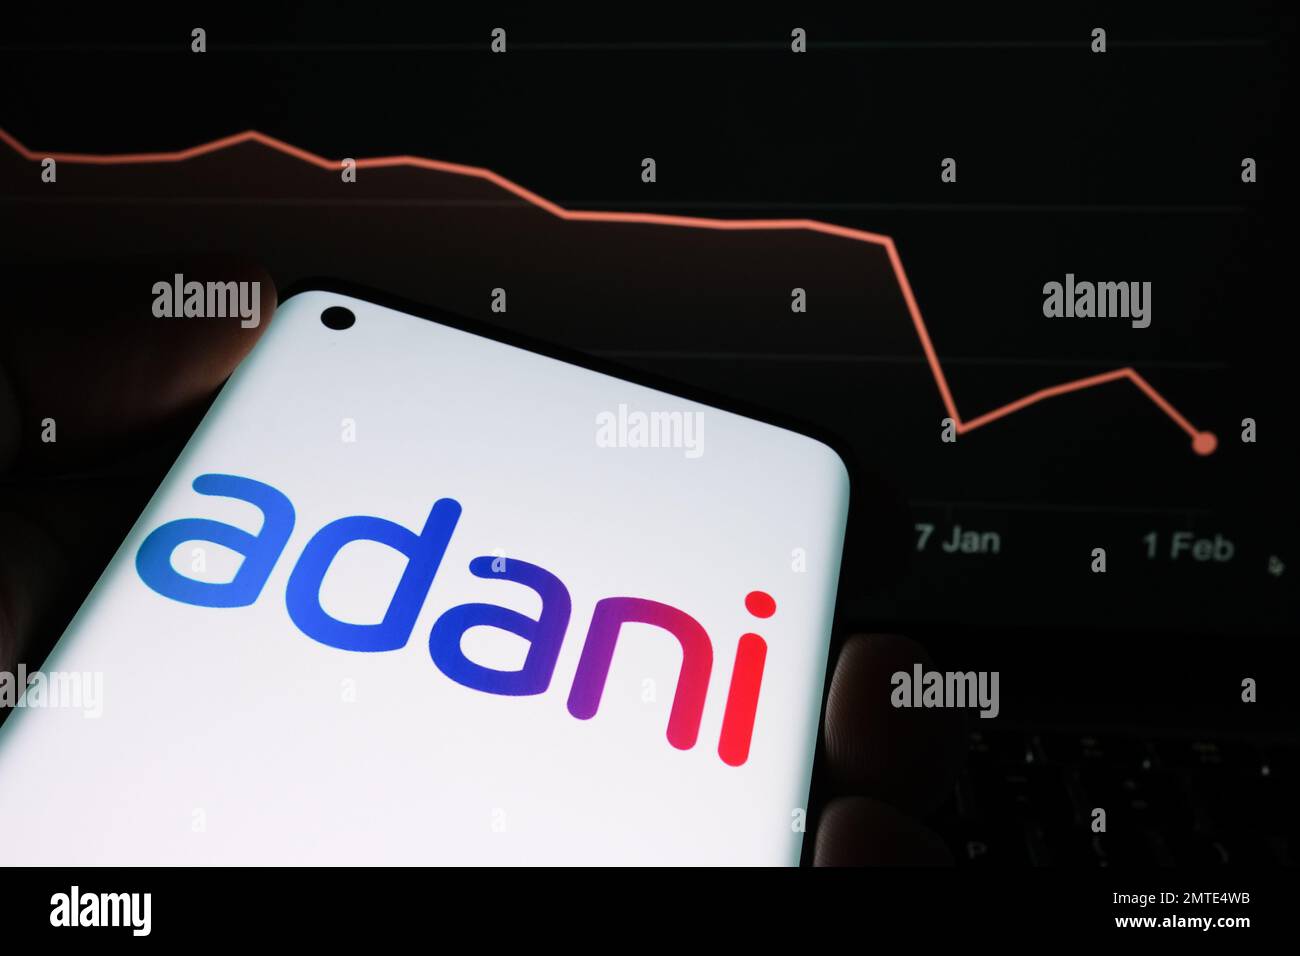 Adani Group logo seen on the smartphone screen and company stock price drop graph seen on the blurred background. Real stock chart for a month time Stock Photo